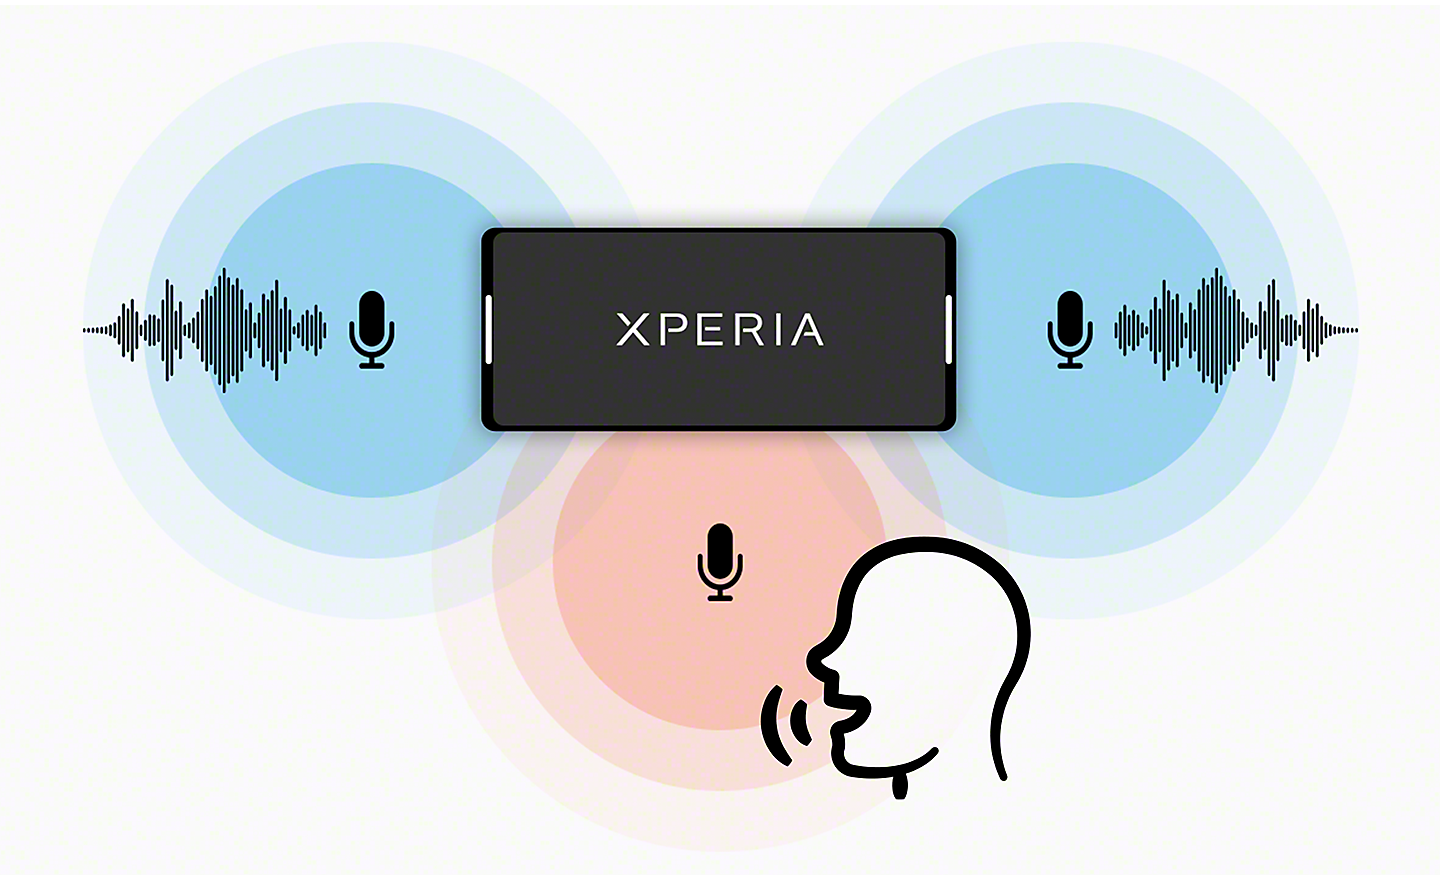 Illustration showing Xperia with stereo microphones, plus a monaural microphone recording speech